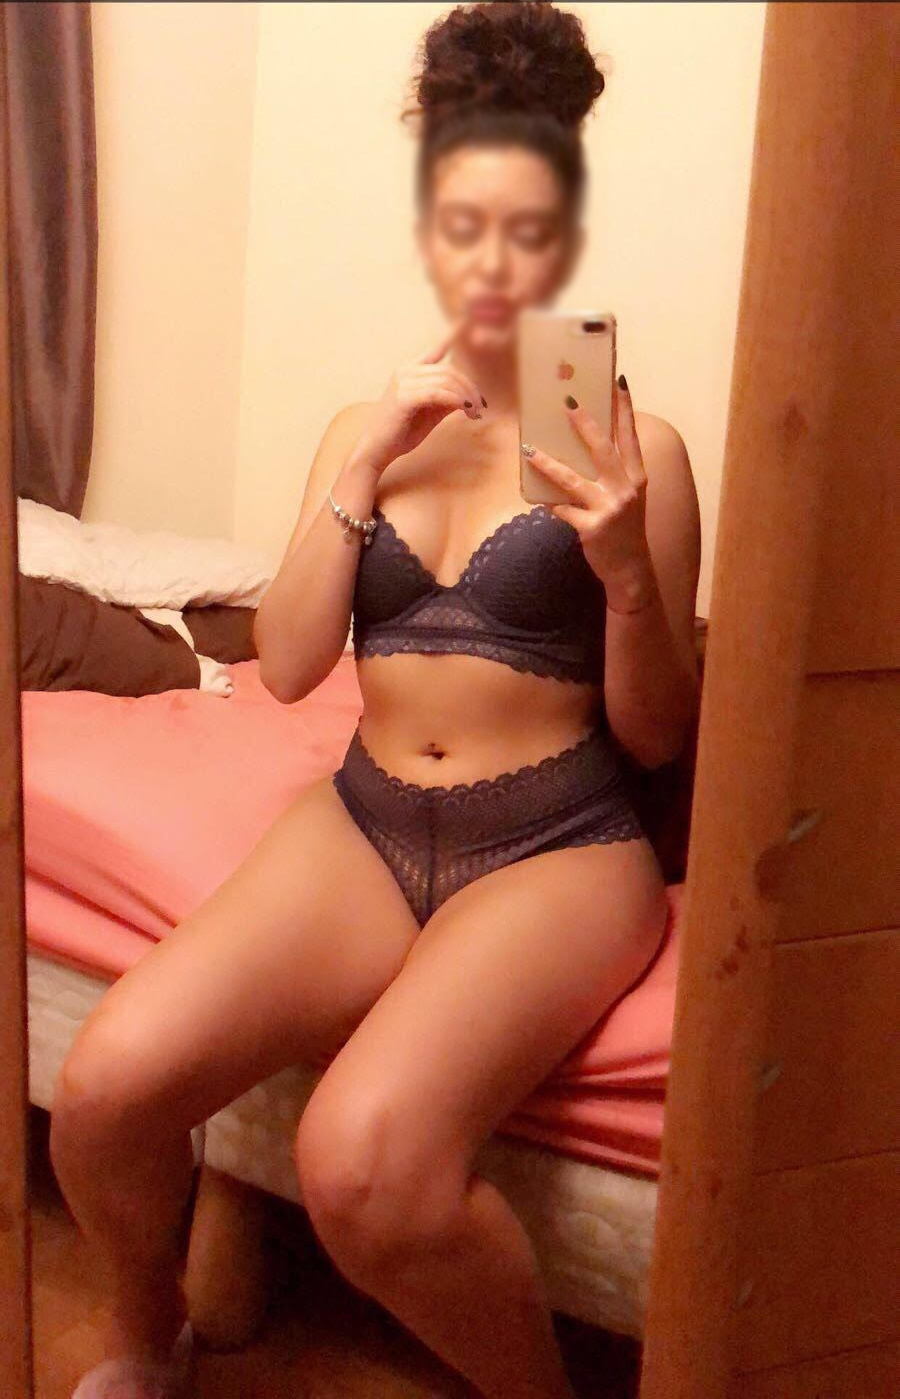 Lizzie taking a selfie in blue lingerie as she sits on her bed